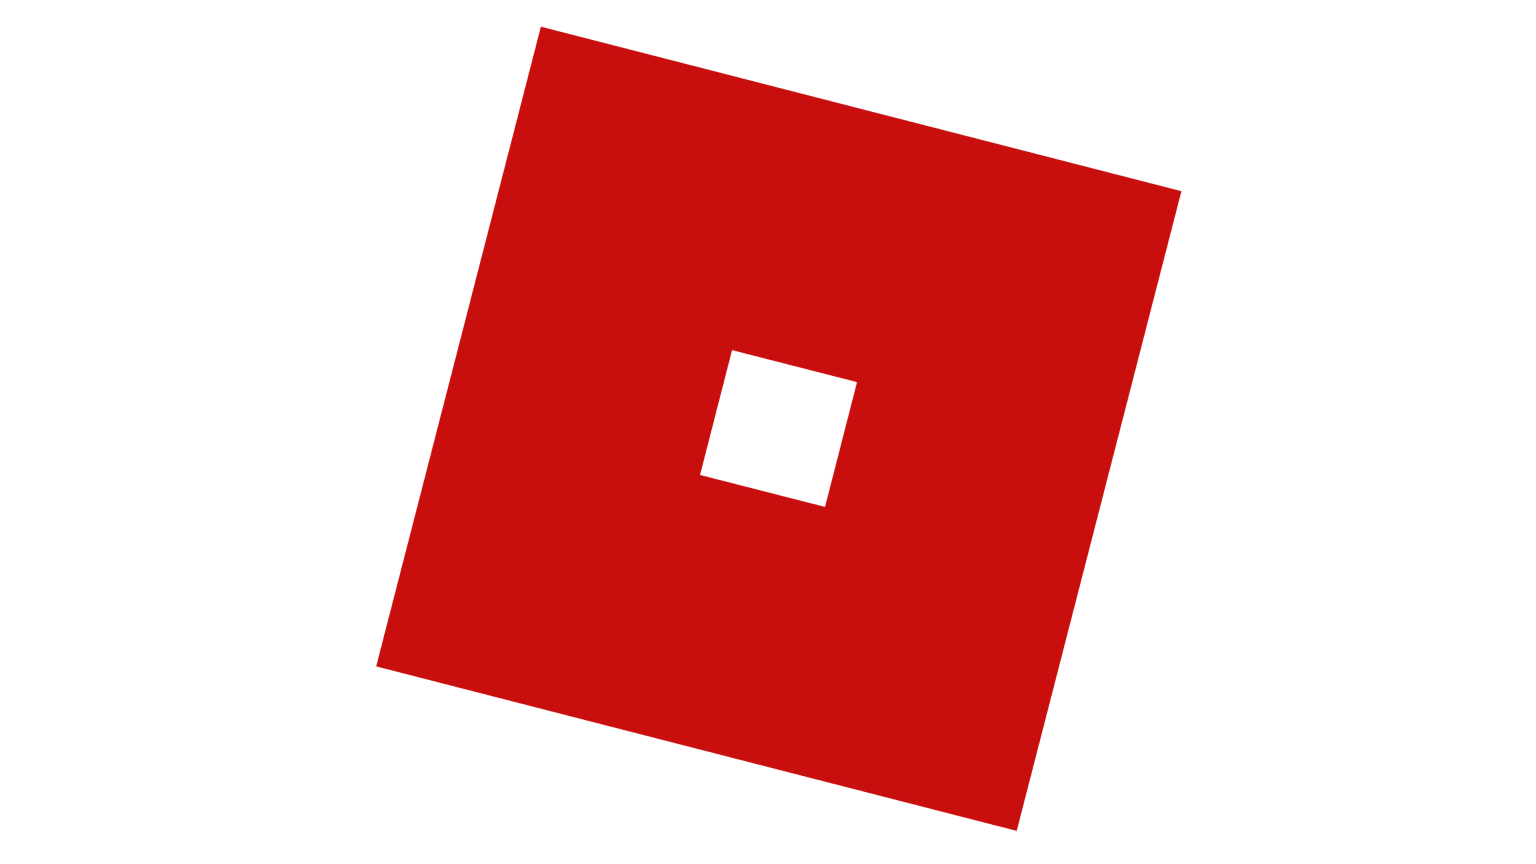 roblox game icon size